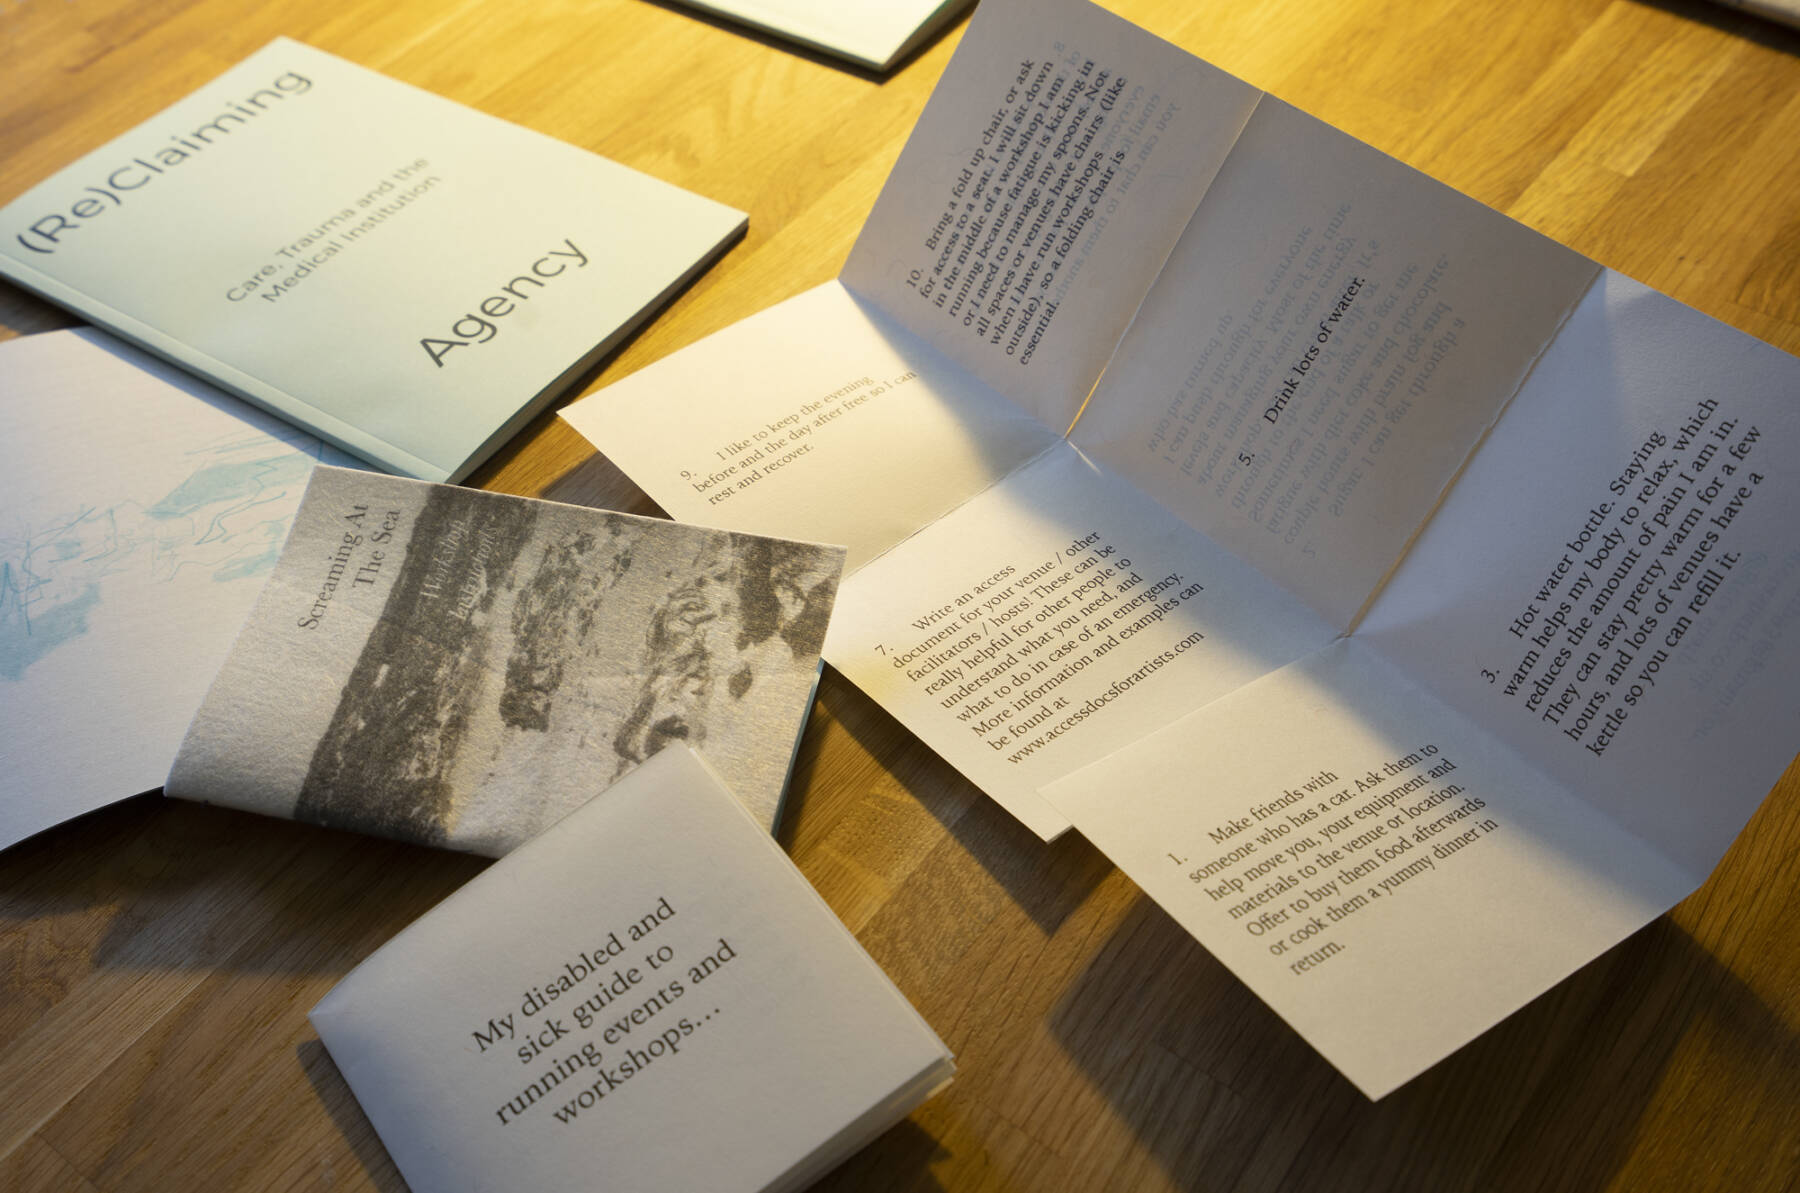 [collection of zines open on a table at an exhibtion]